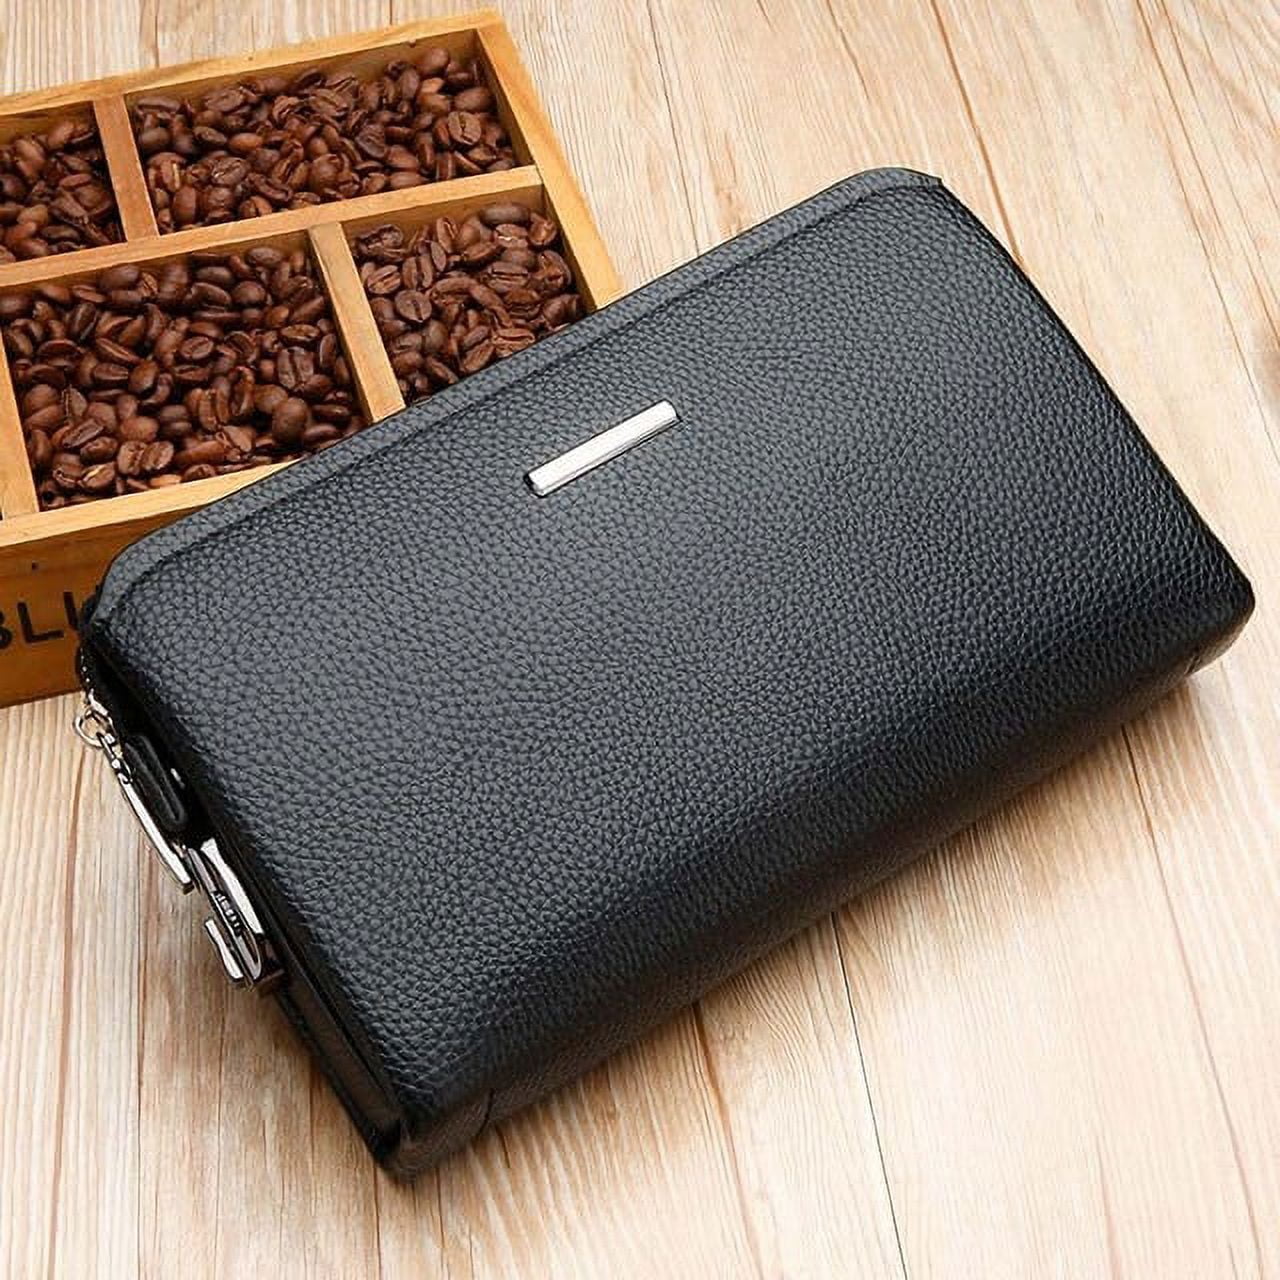 High Quality Anti theft Password Lock Clutch Bag Brand Design Mens Business Wallet Cell Phone Pocket Fashion Birthday Gift Purse 4bbbcf00 74c3 4605 8c99 8981c8266ddb.de5d3a44aed0045ce38d7acb8cbd9ef2